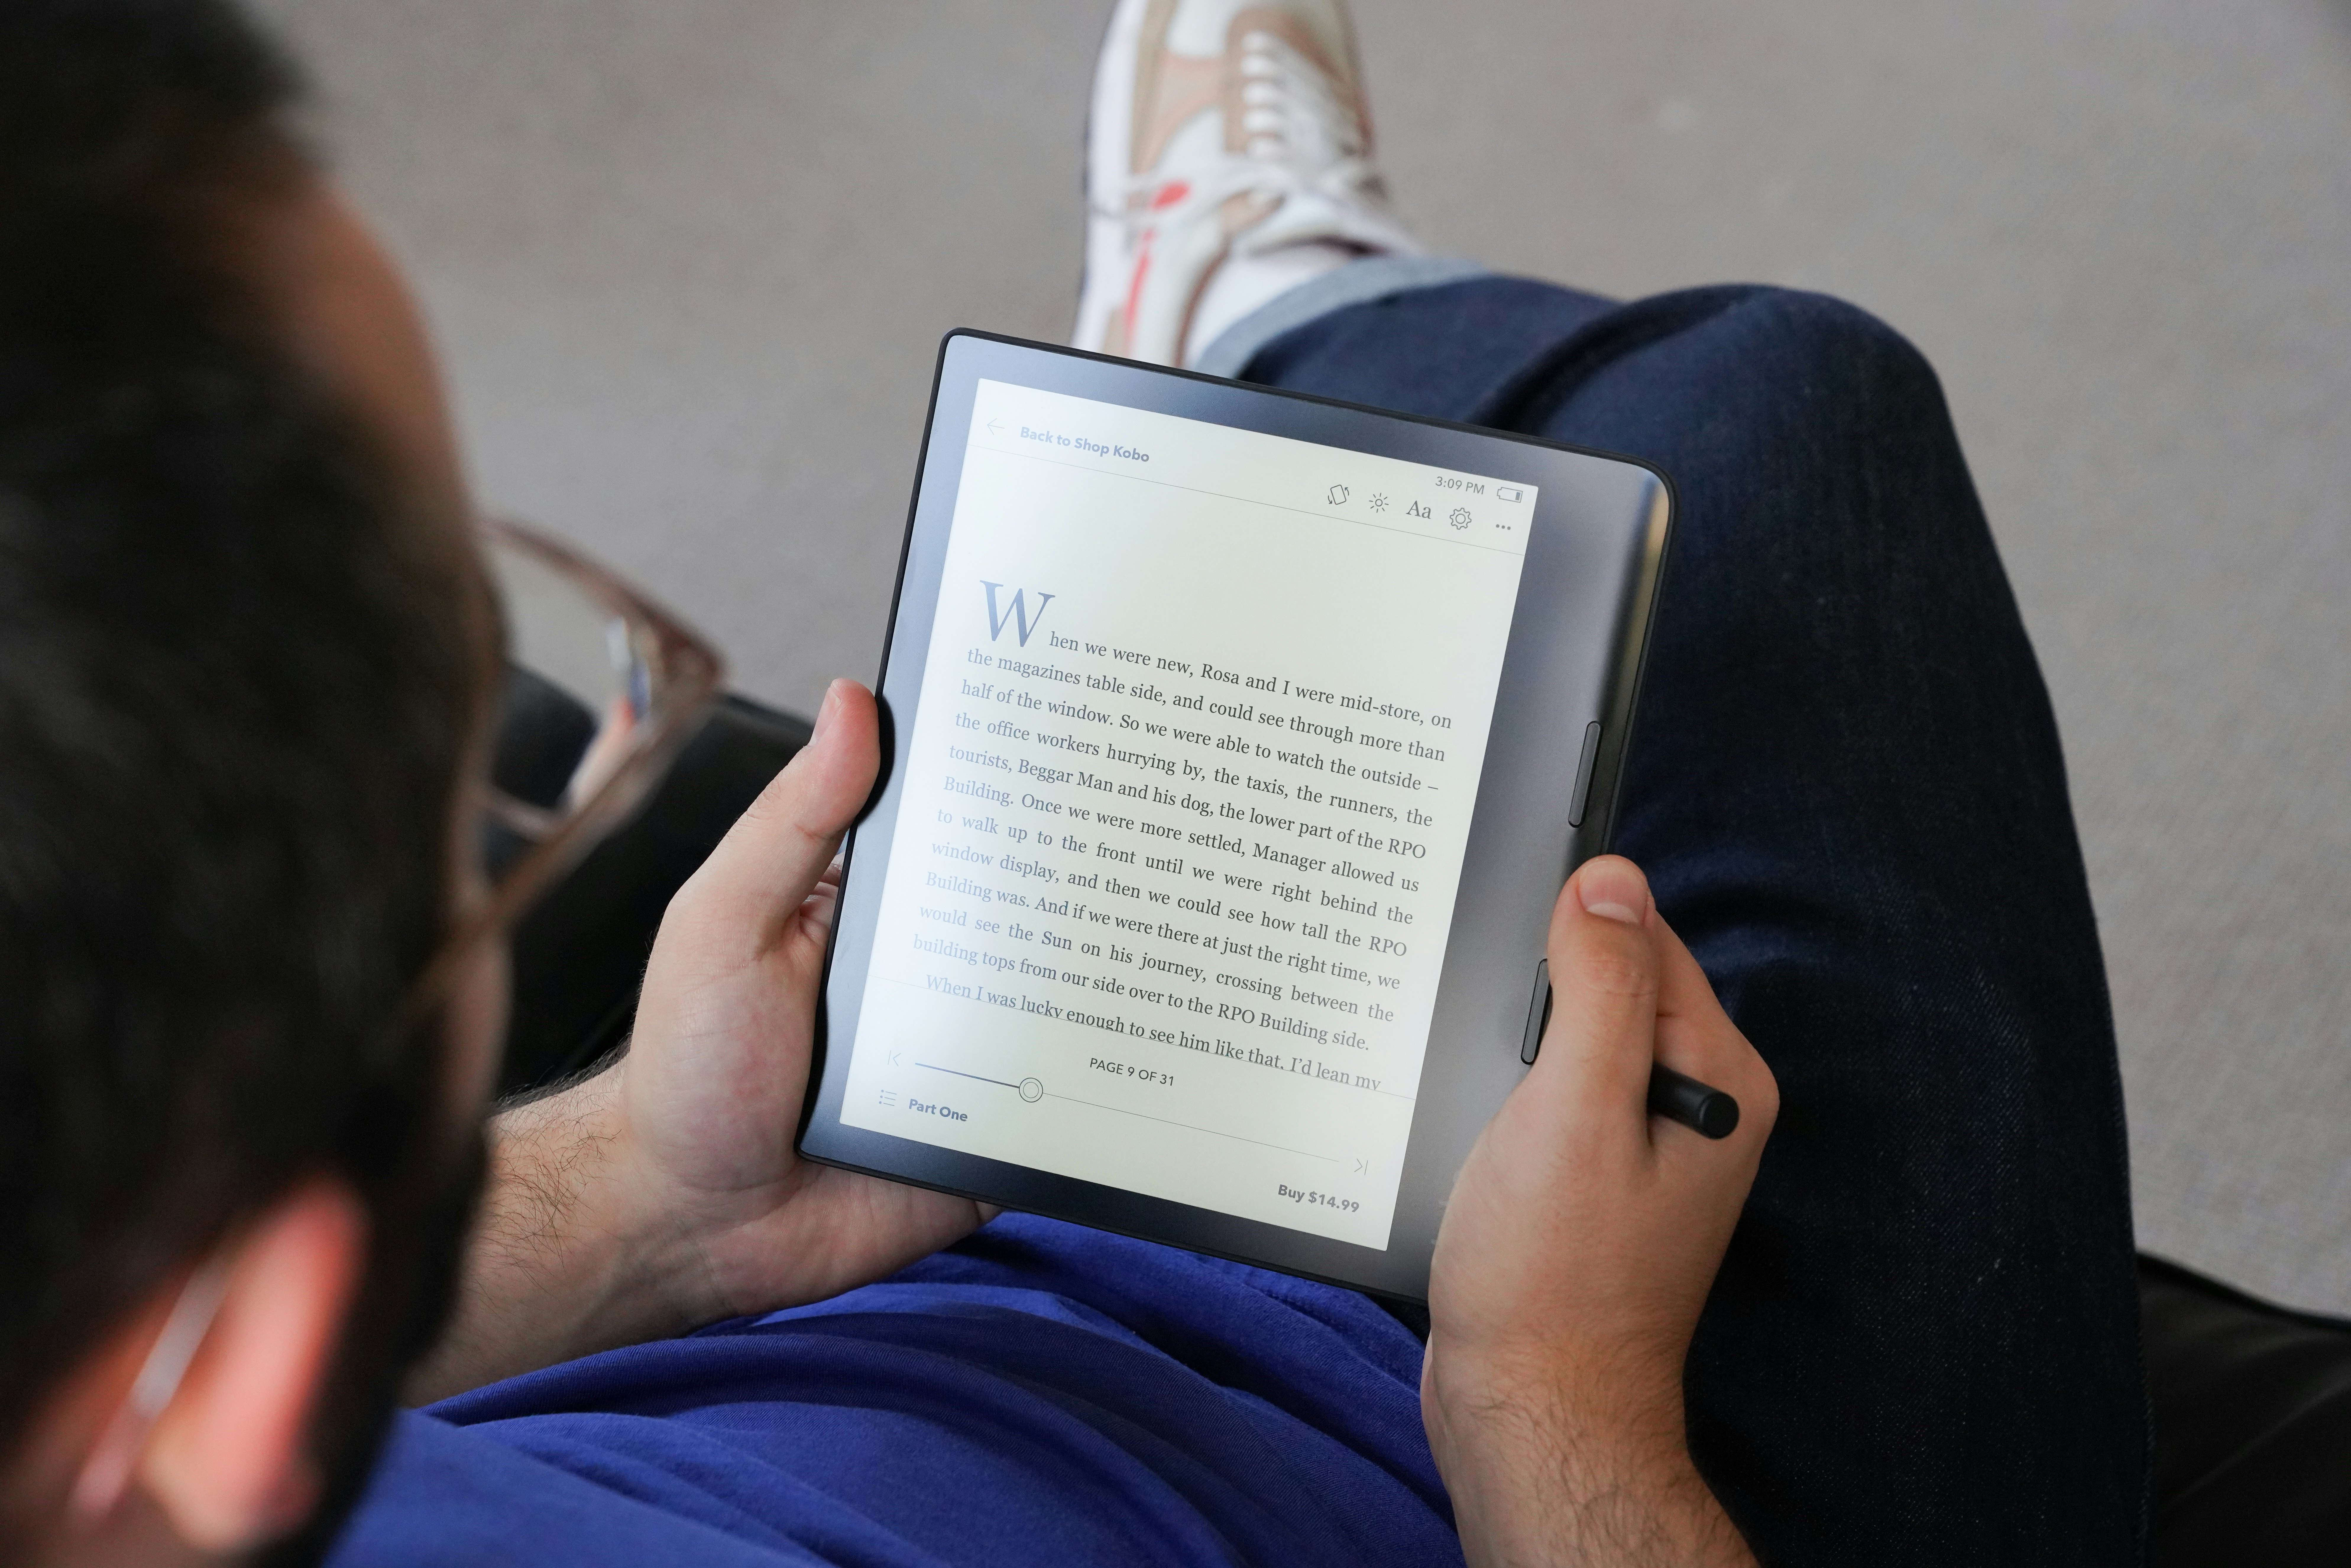 Kobo Sage review: Feature-packed ereader - Can Buy or Not